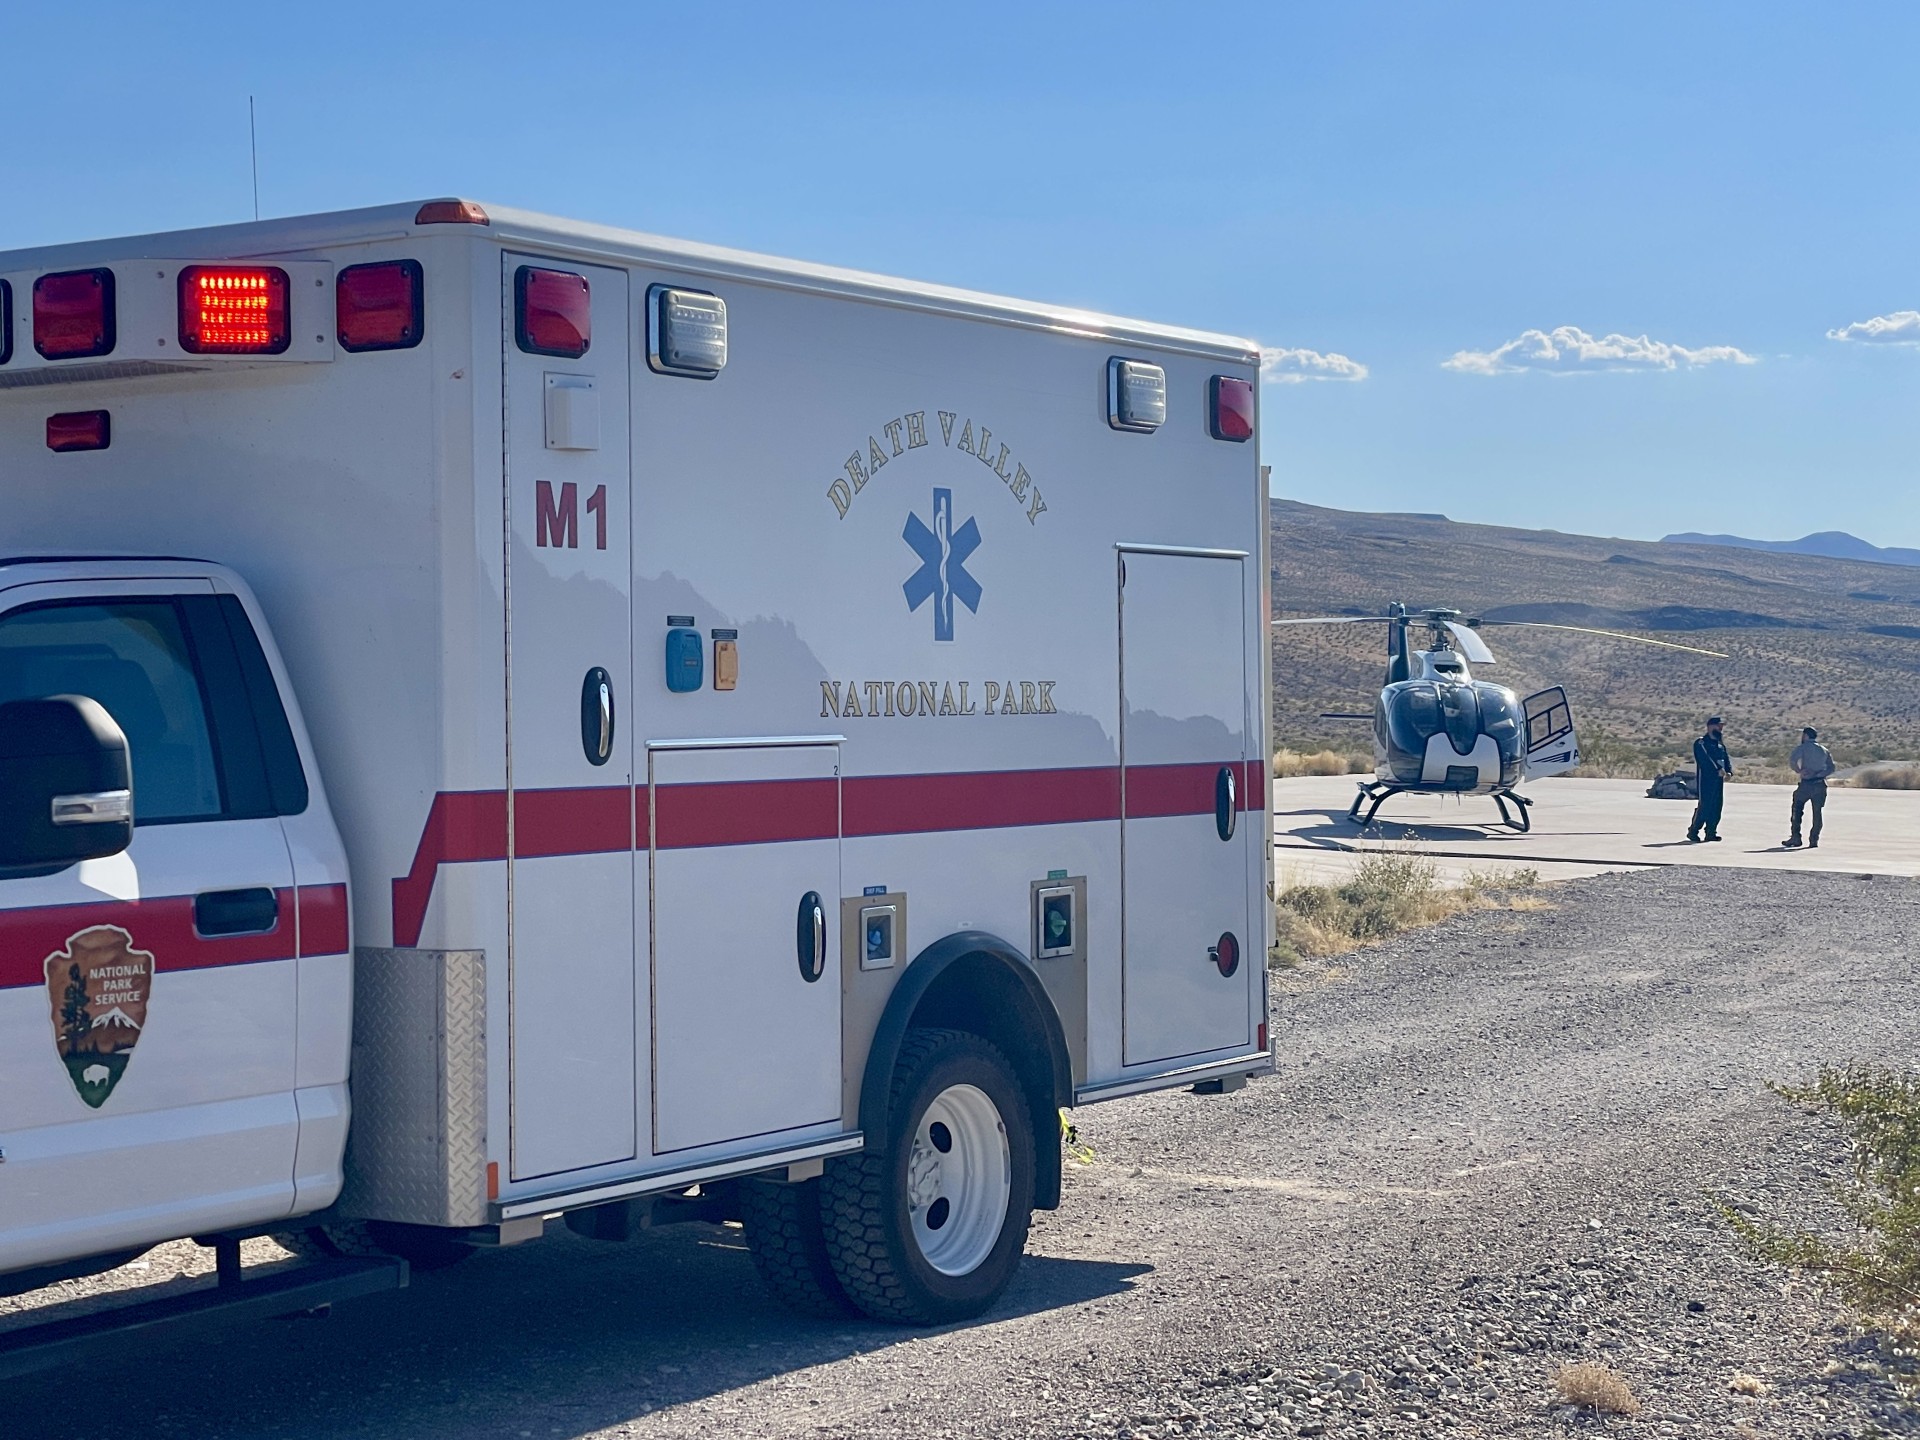 A white ambulance with a red stripe and a helicopter are in open desert landscape.